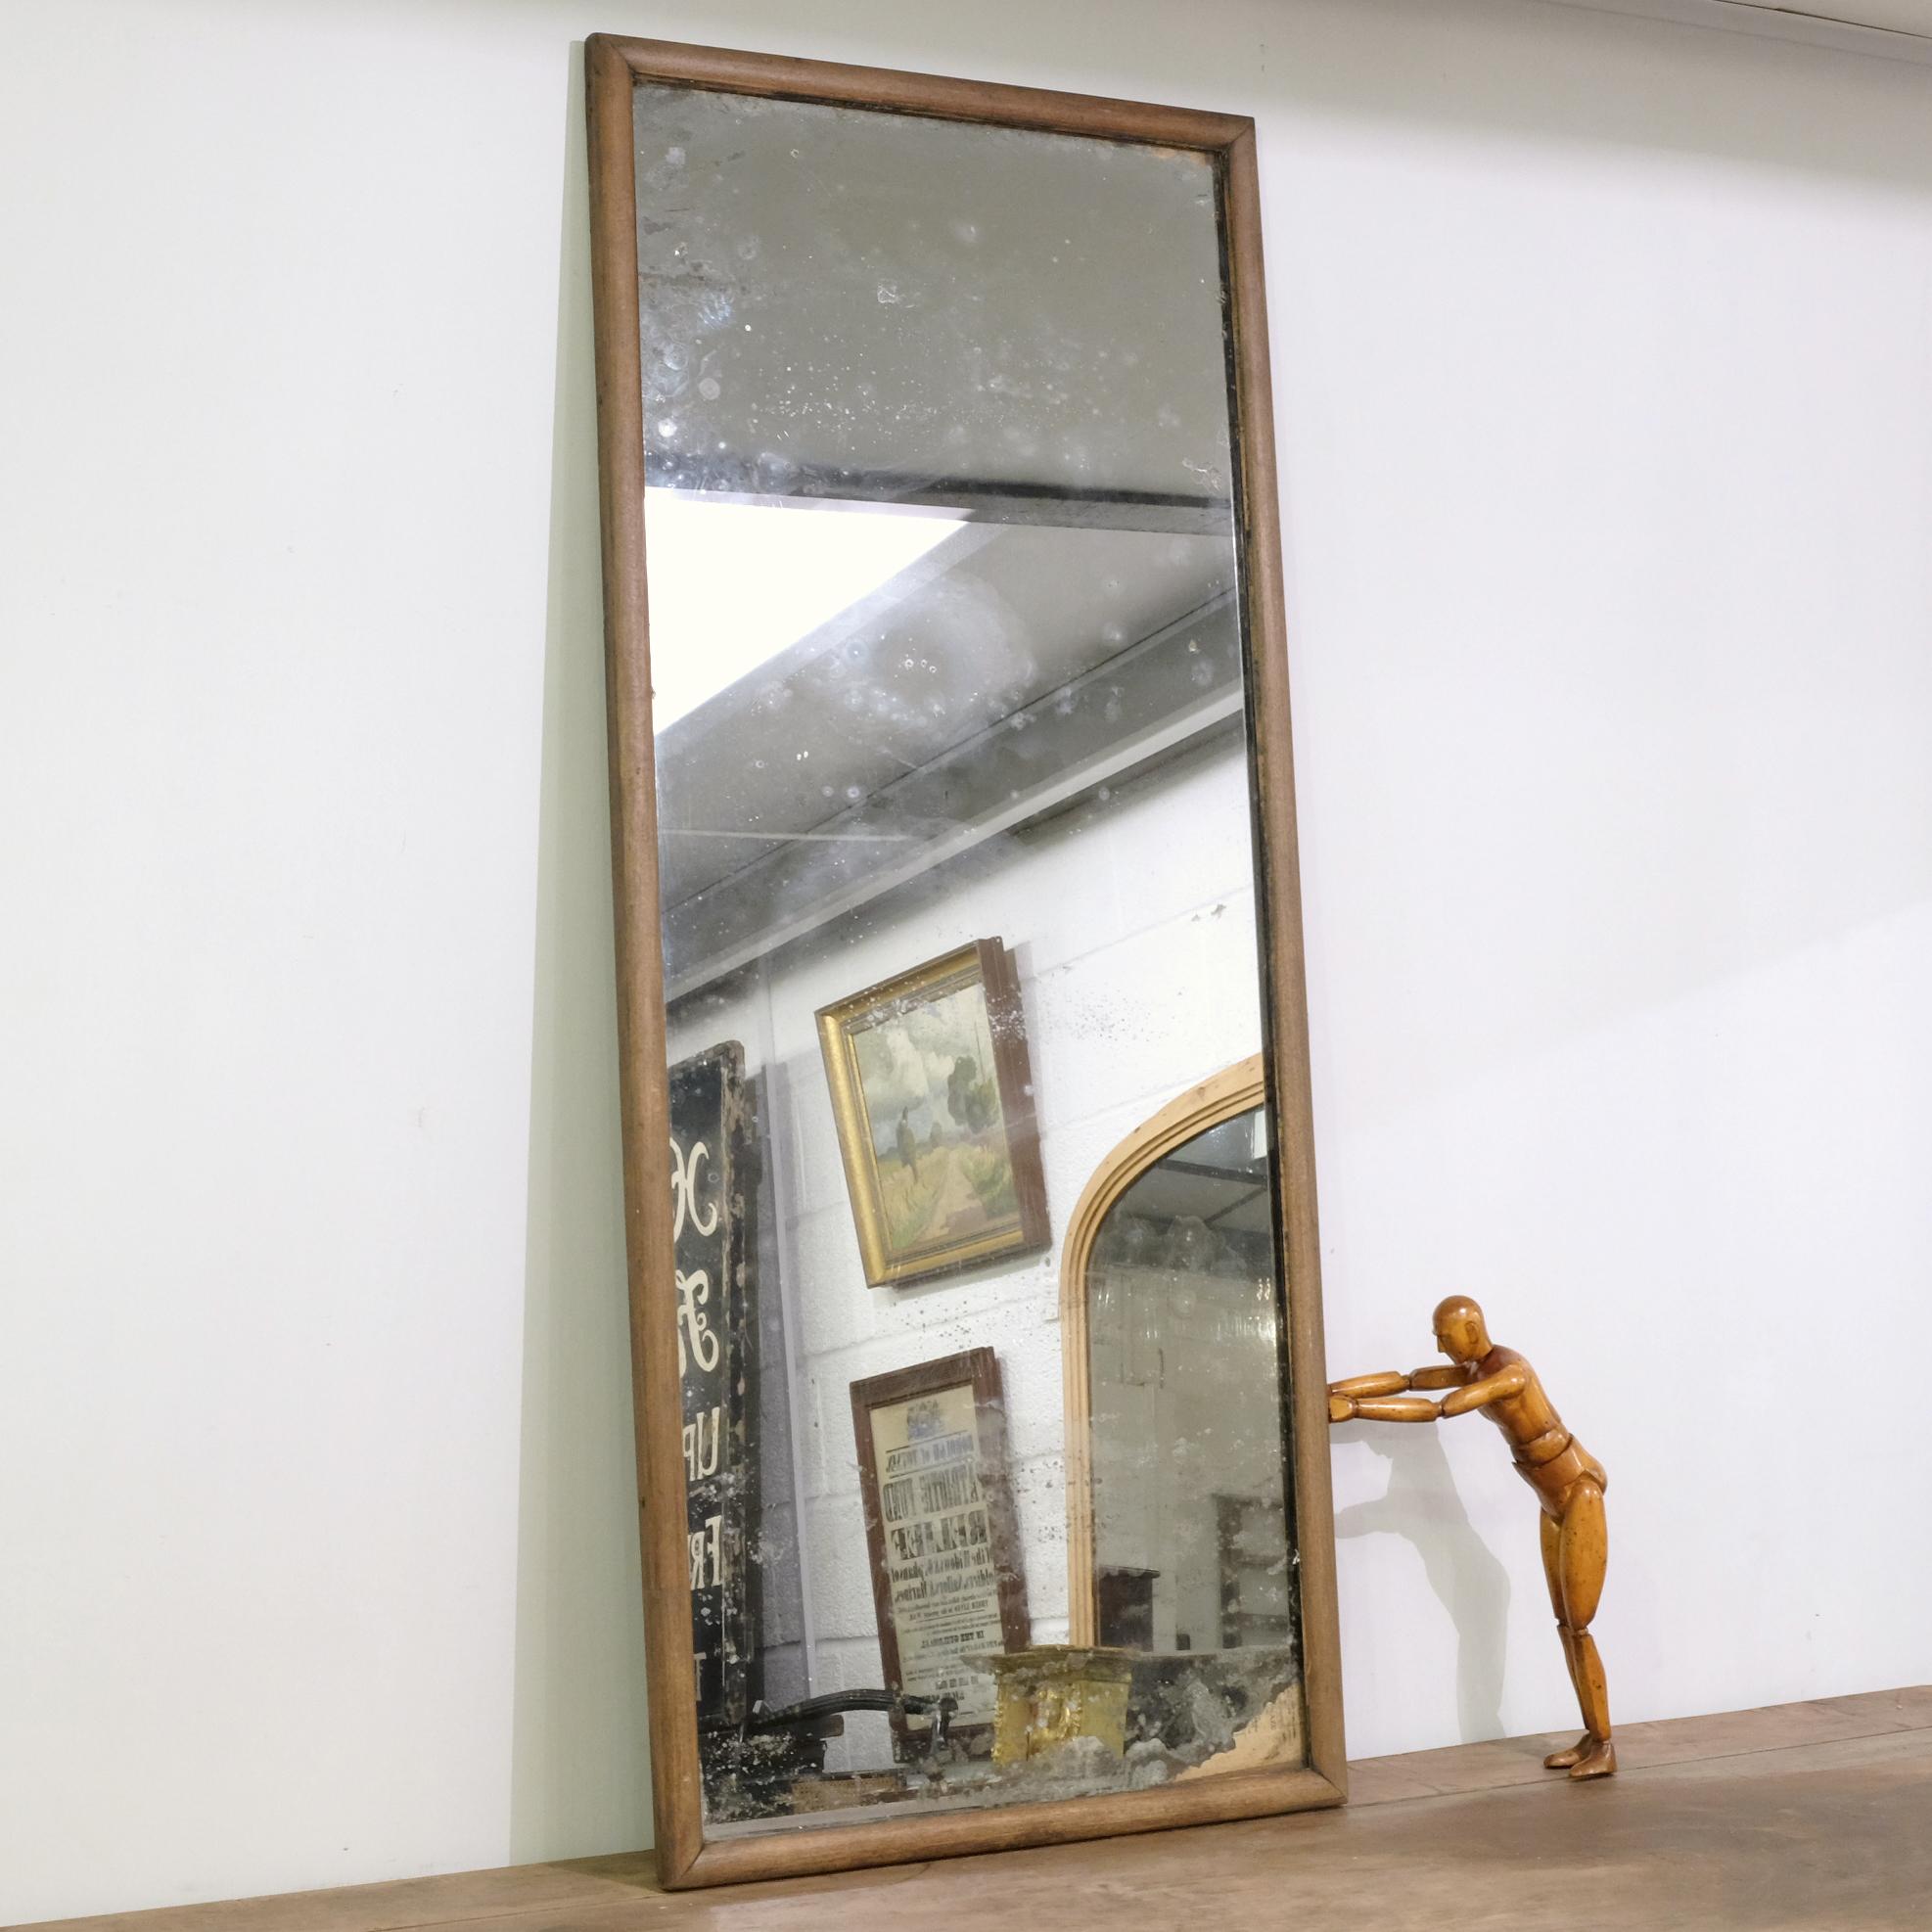 Antique mirror with simple oak frame and original mercury plate. The glass shows lots of characterful ageing, interestingly in places revealing old newspaper backing. Can be hung portrait or landscape, circa early 1900s.

Free shipping offered to